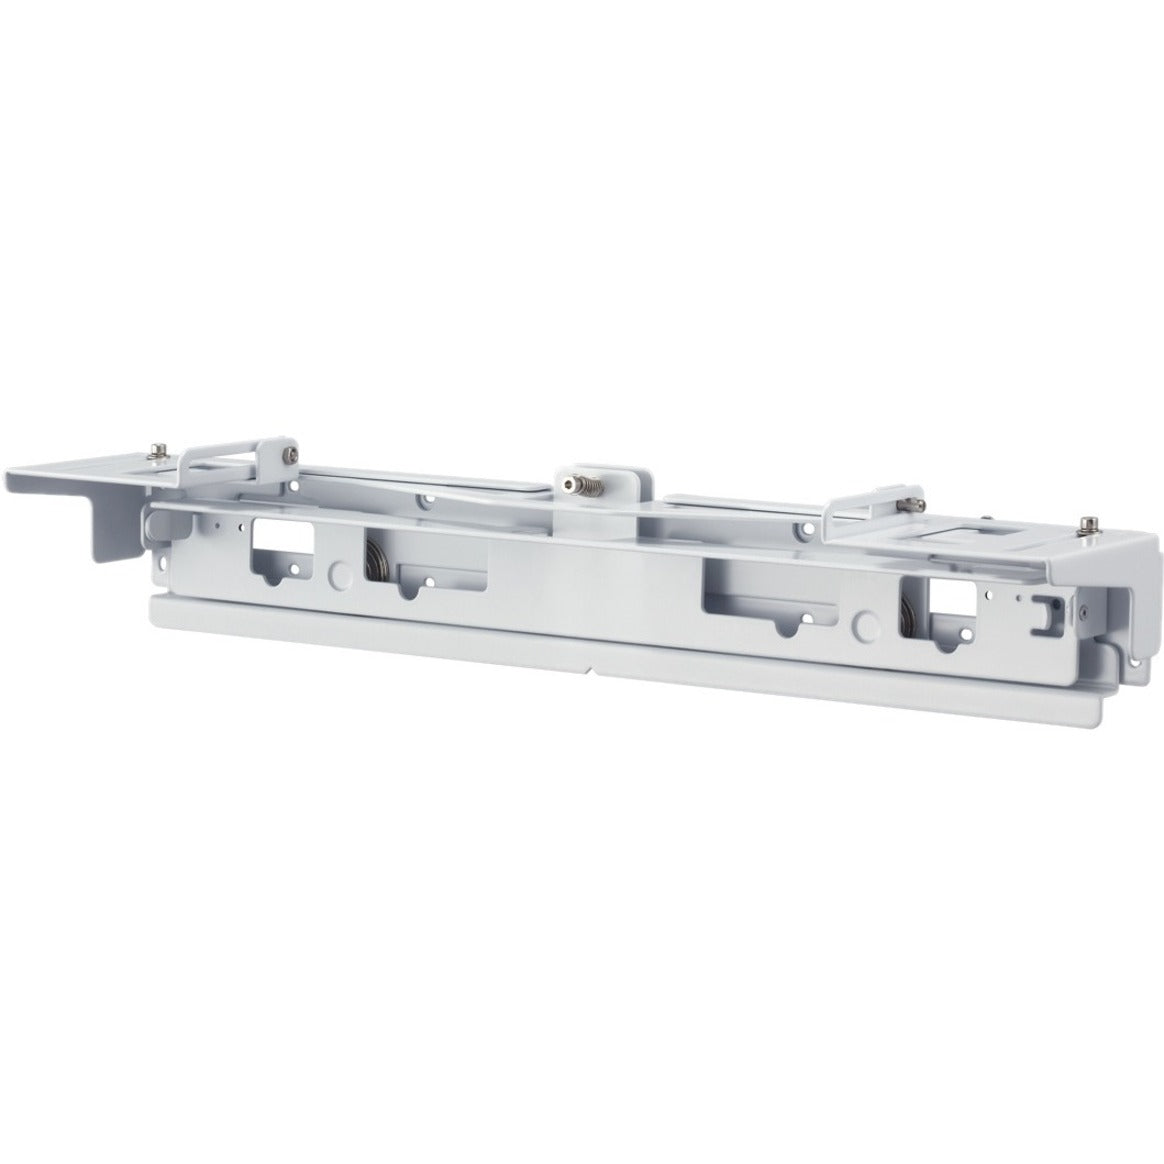 Epson V12HA05A09 Bracket for BrightLink Interactive Touch Module, Wall Mount for Epson BrightLink Projectors